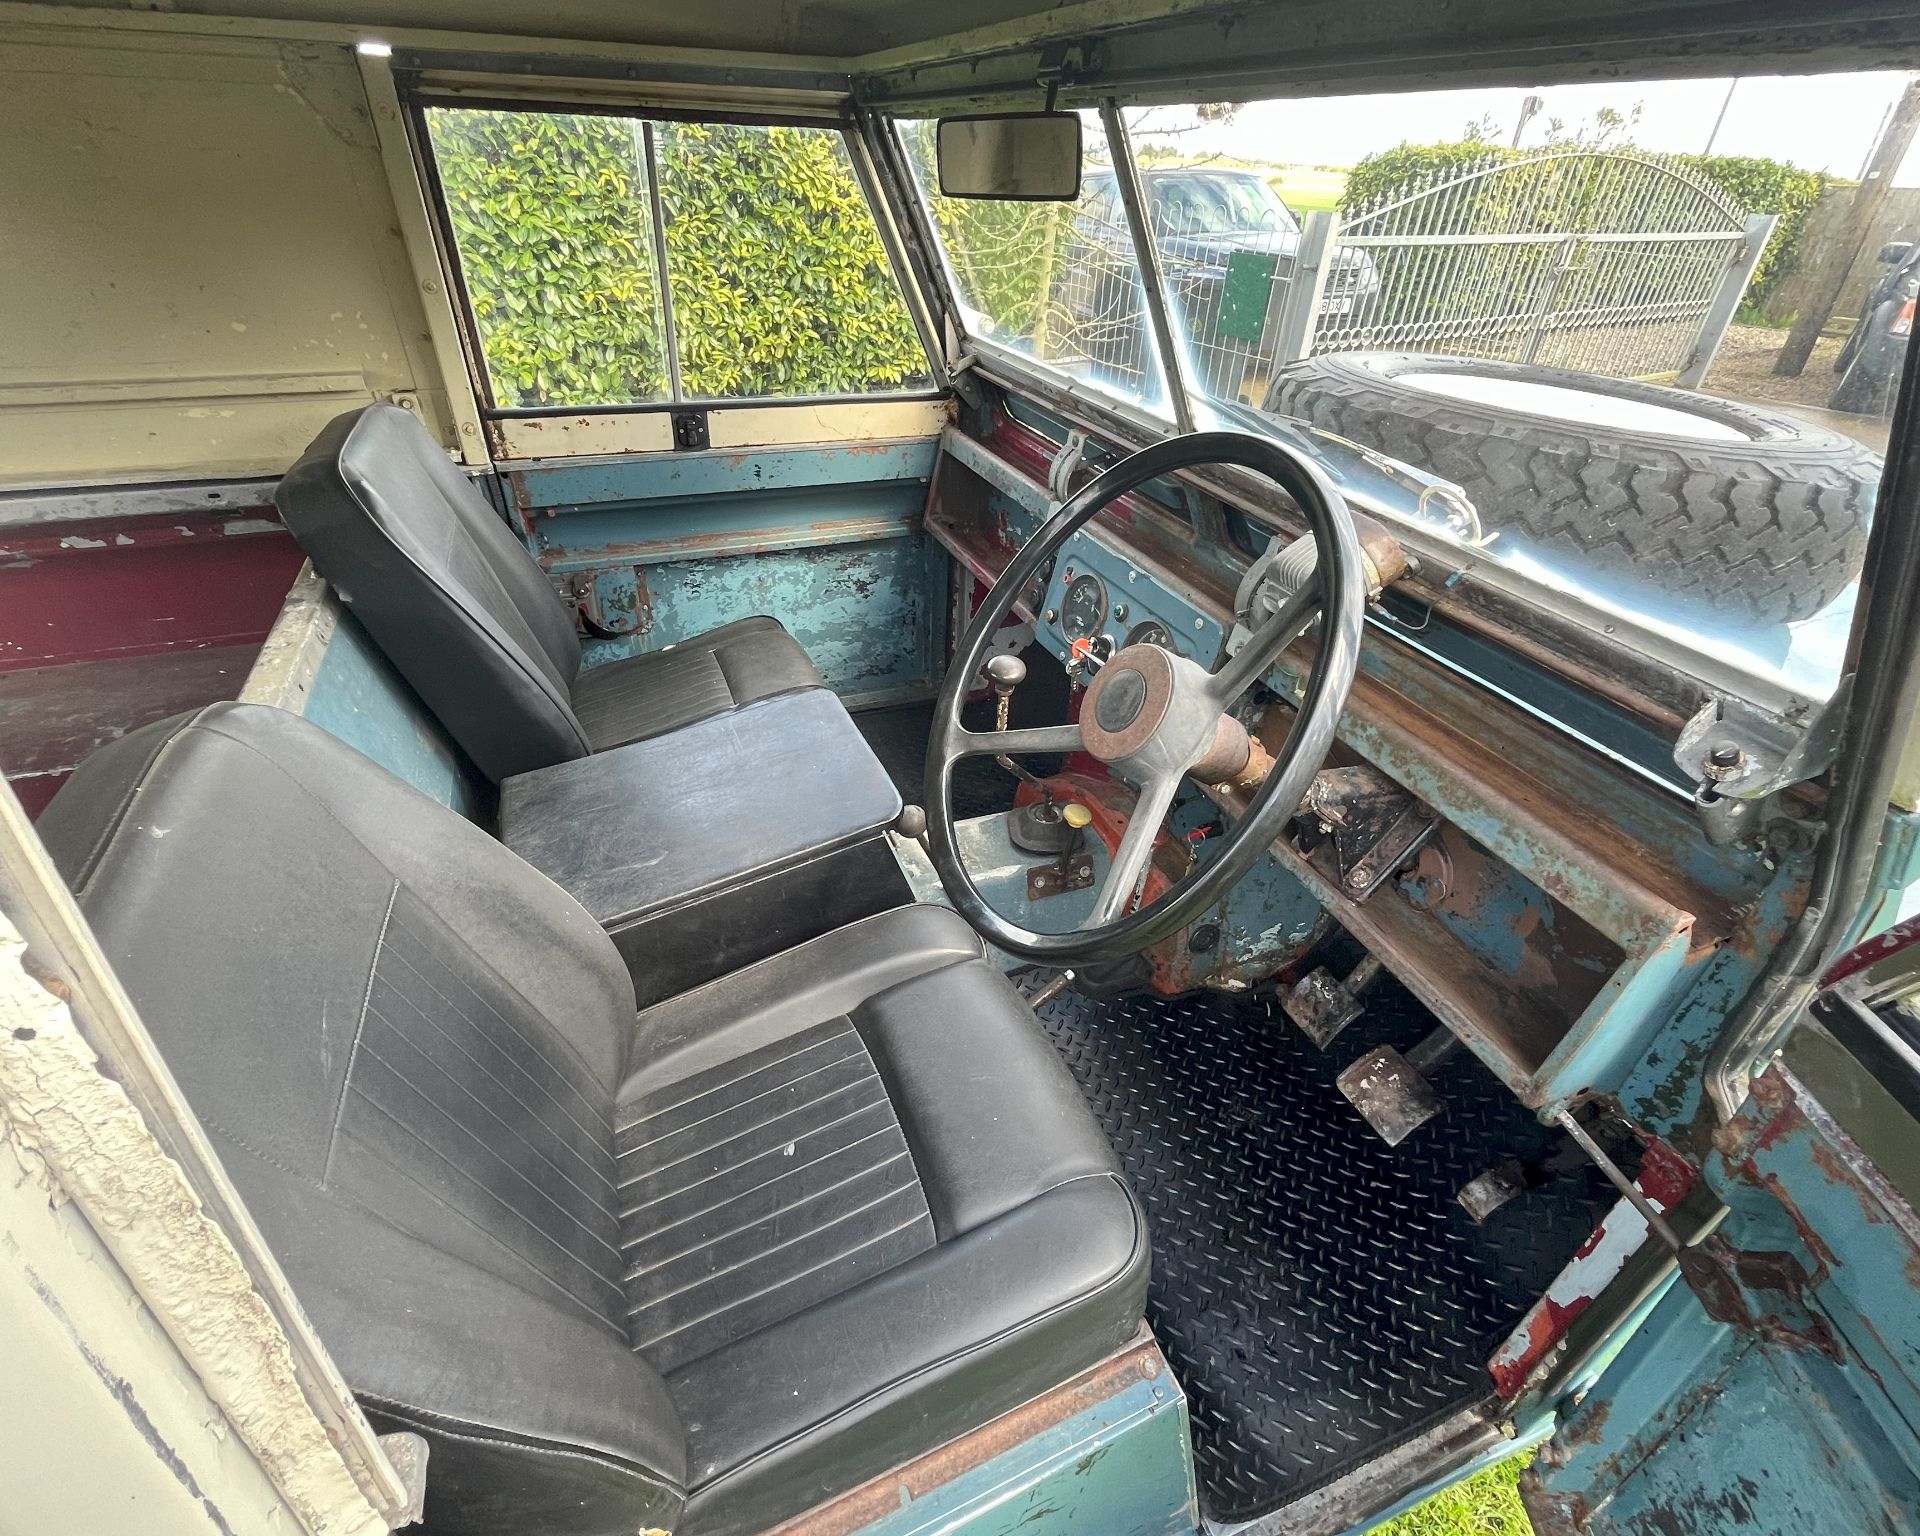 1962 Land Rover 88 Series II, petrol 2.25 litre engine, blue with 64,078 showing on the milometer, - Image 9 of 14